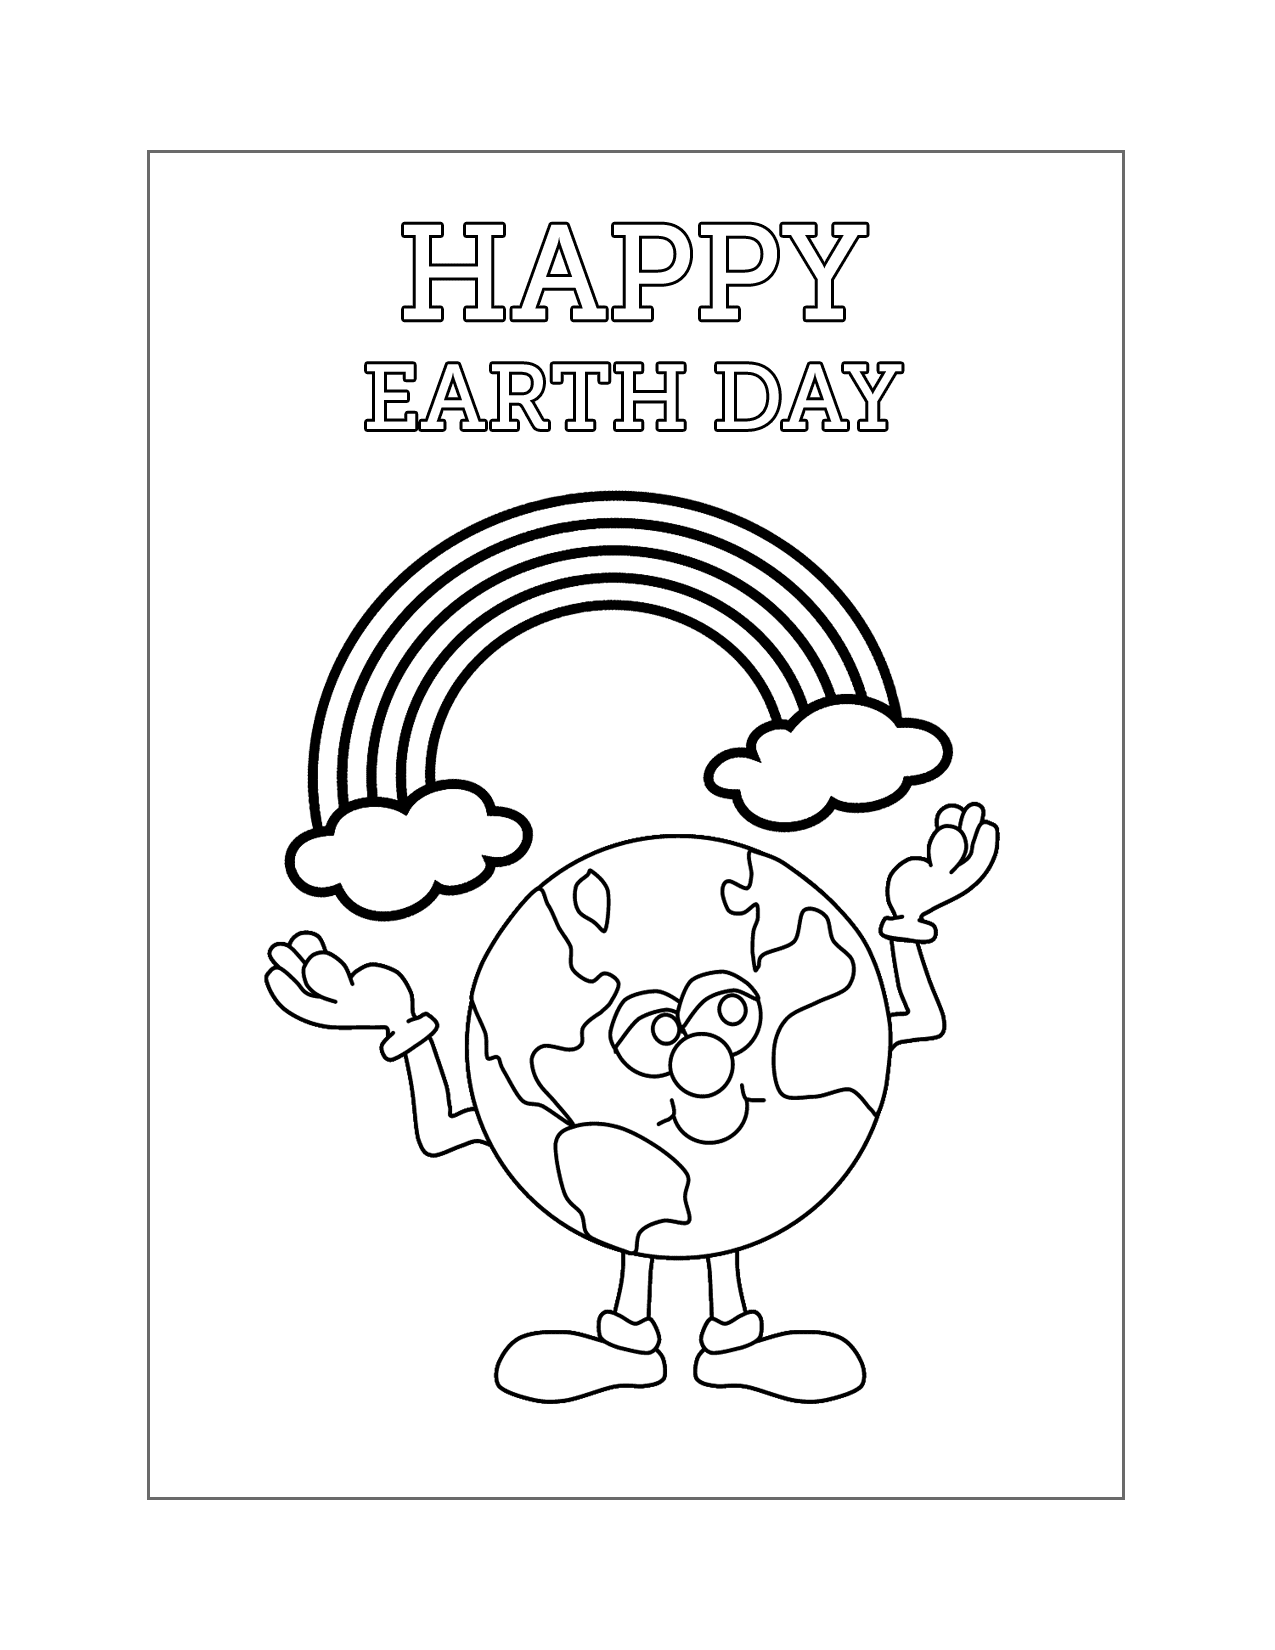 Happy Earth Day Coloring Sheet